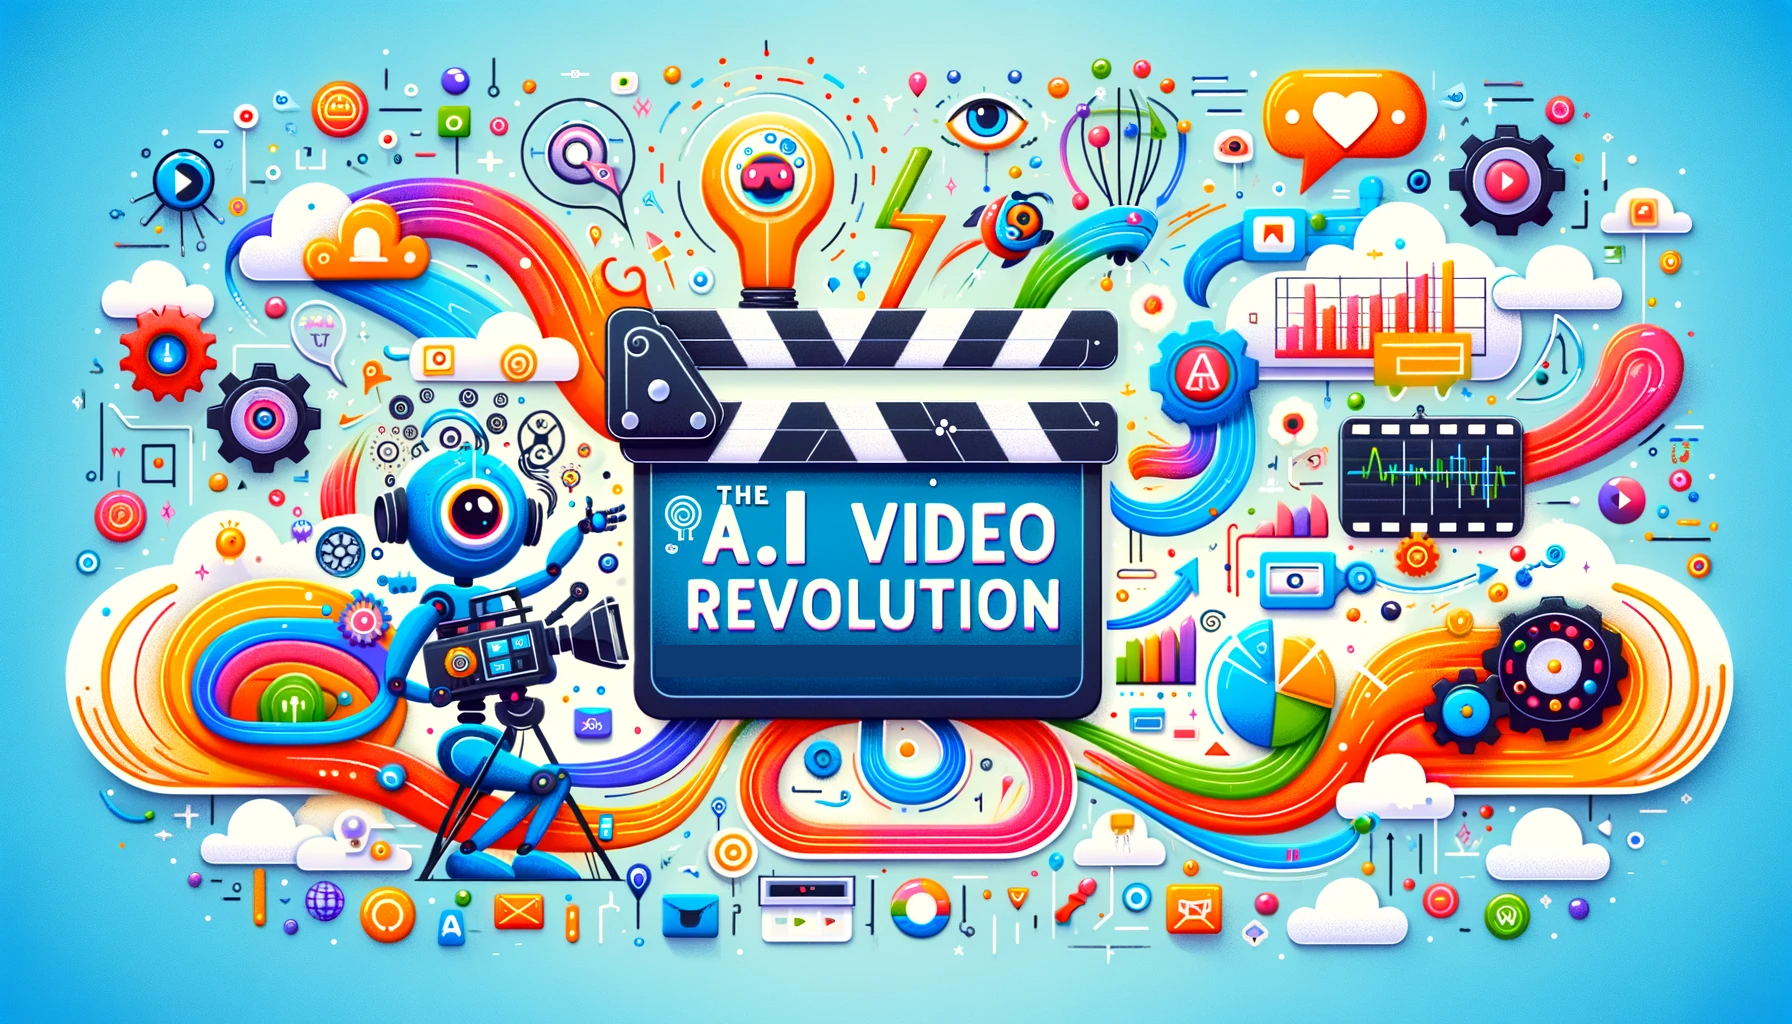 it is a colorful illustration of a video revolution .